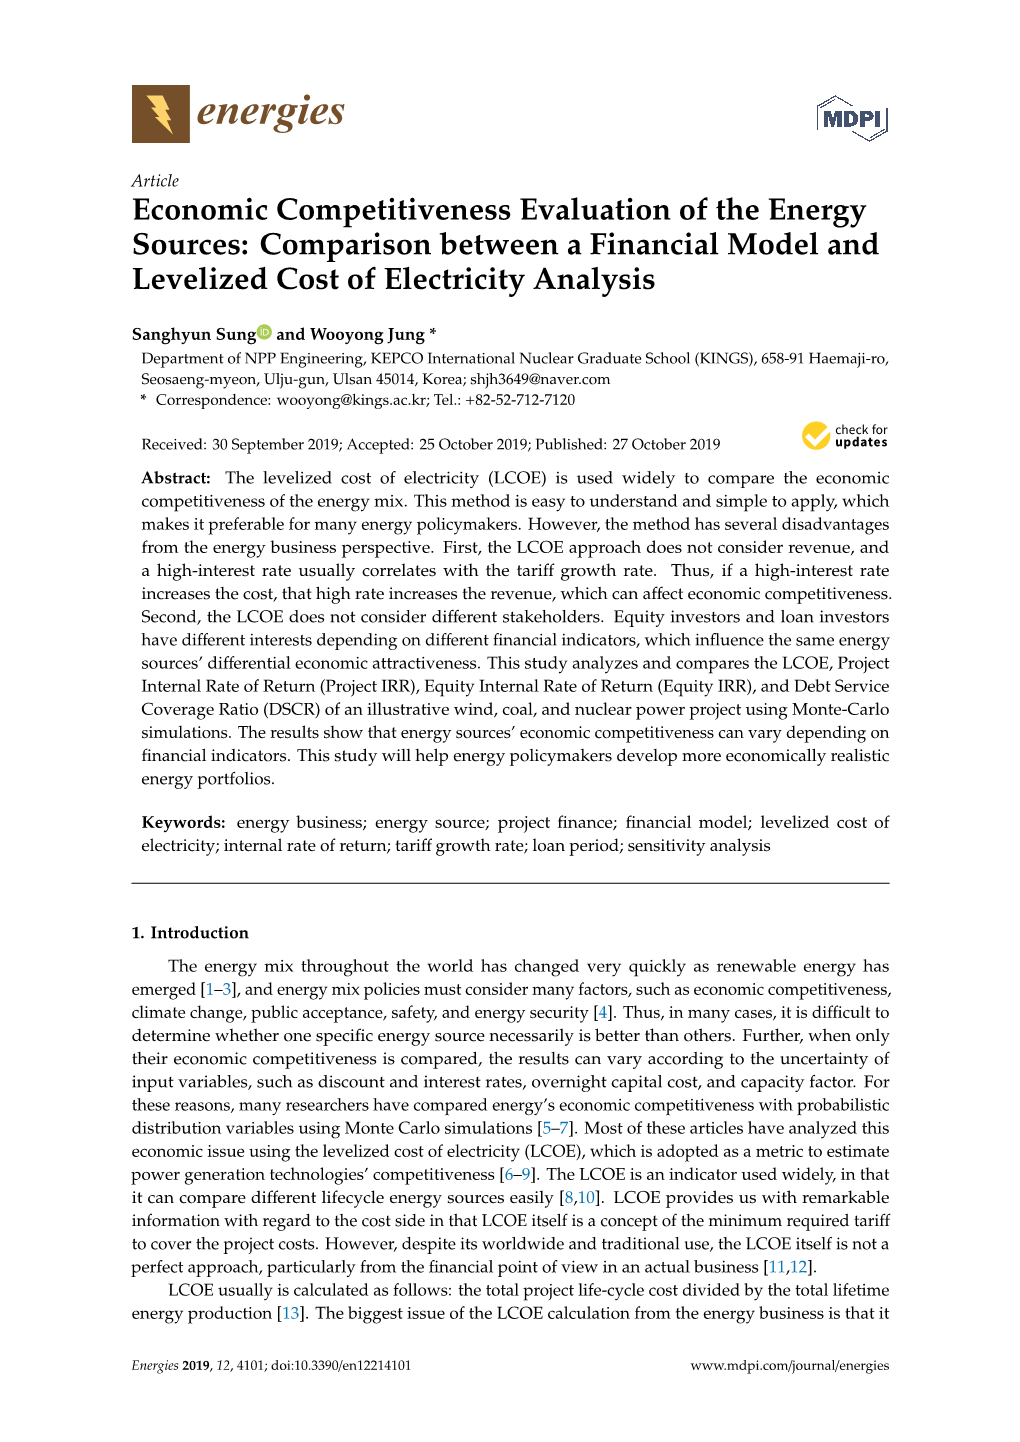 Economic Competitiveness Evaluation of the Energy Sources: Comparison Between a Financial Model and Levelized Cost of Electricity Analysis